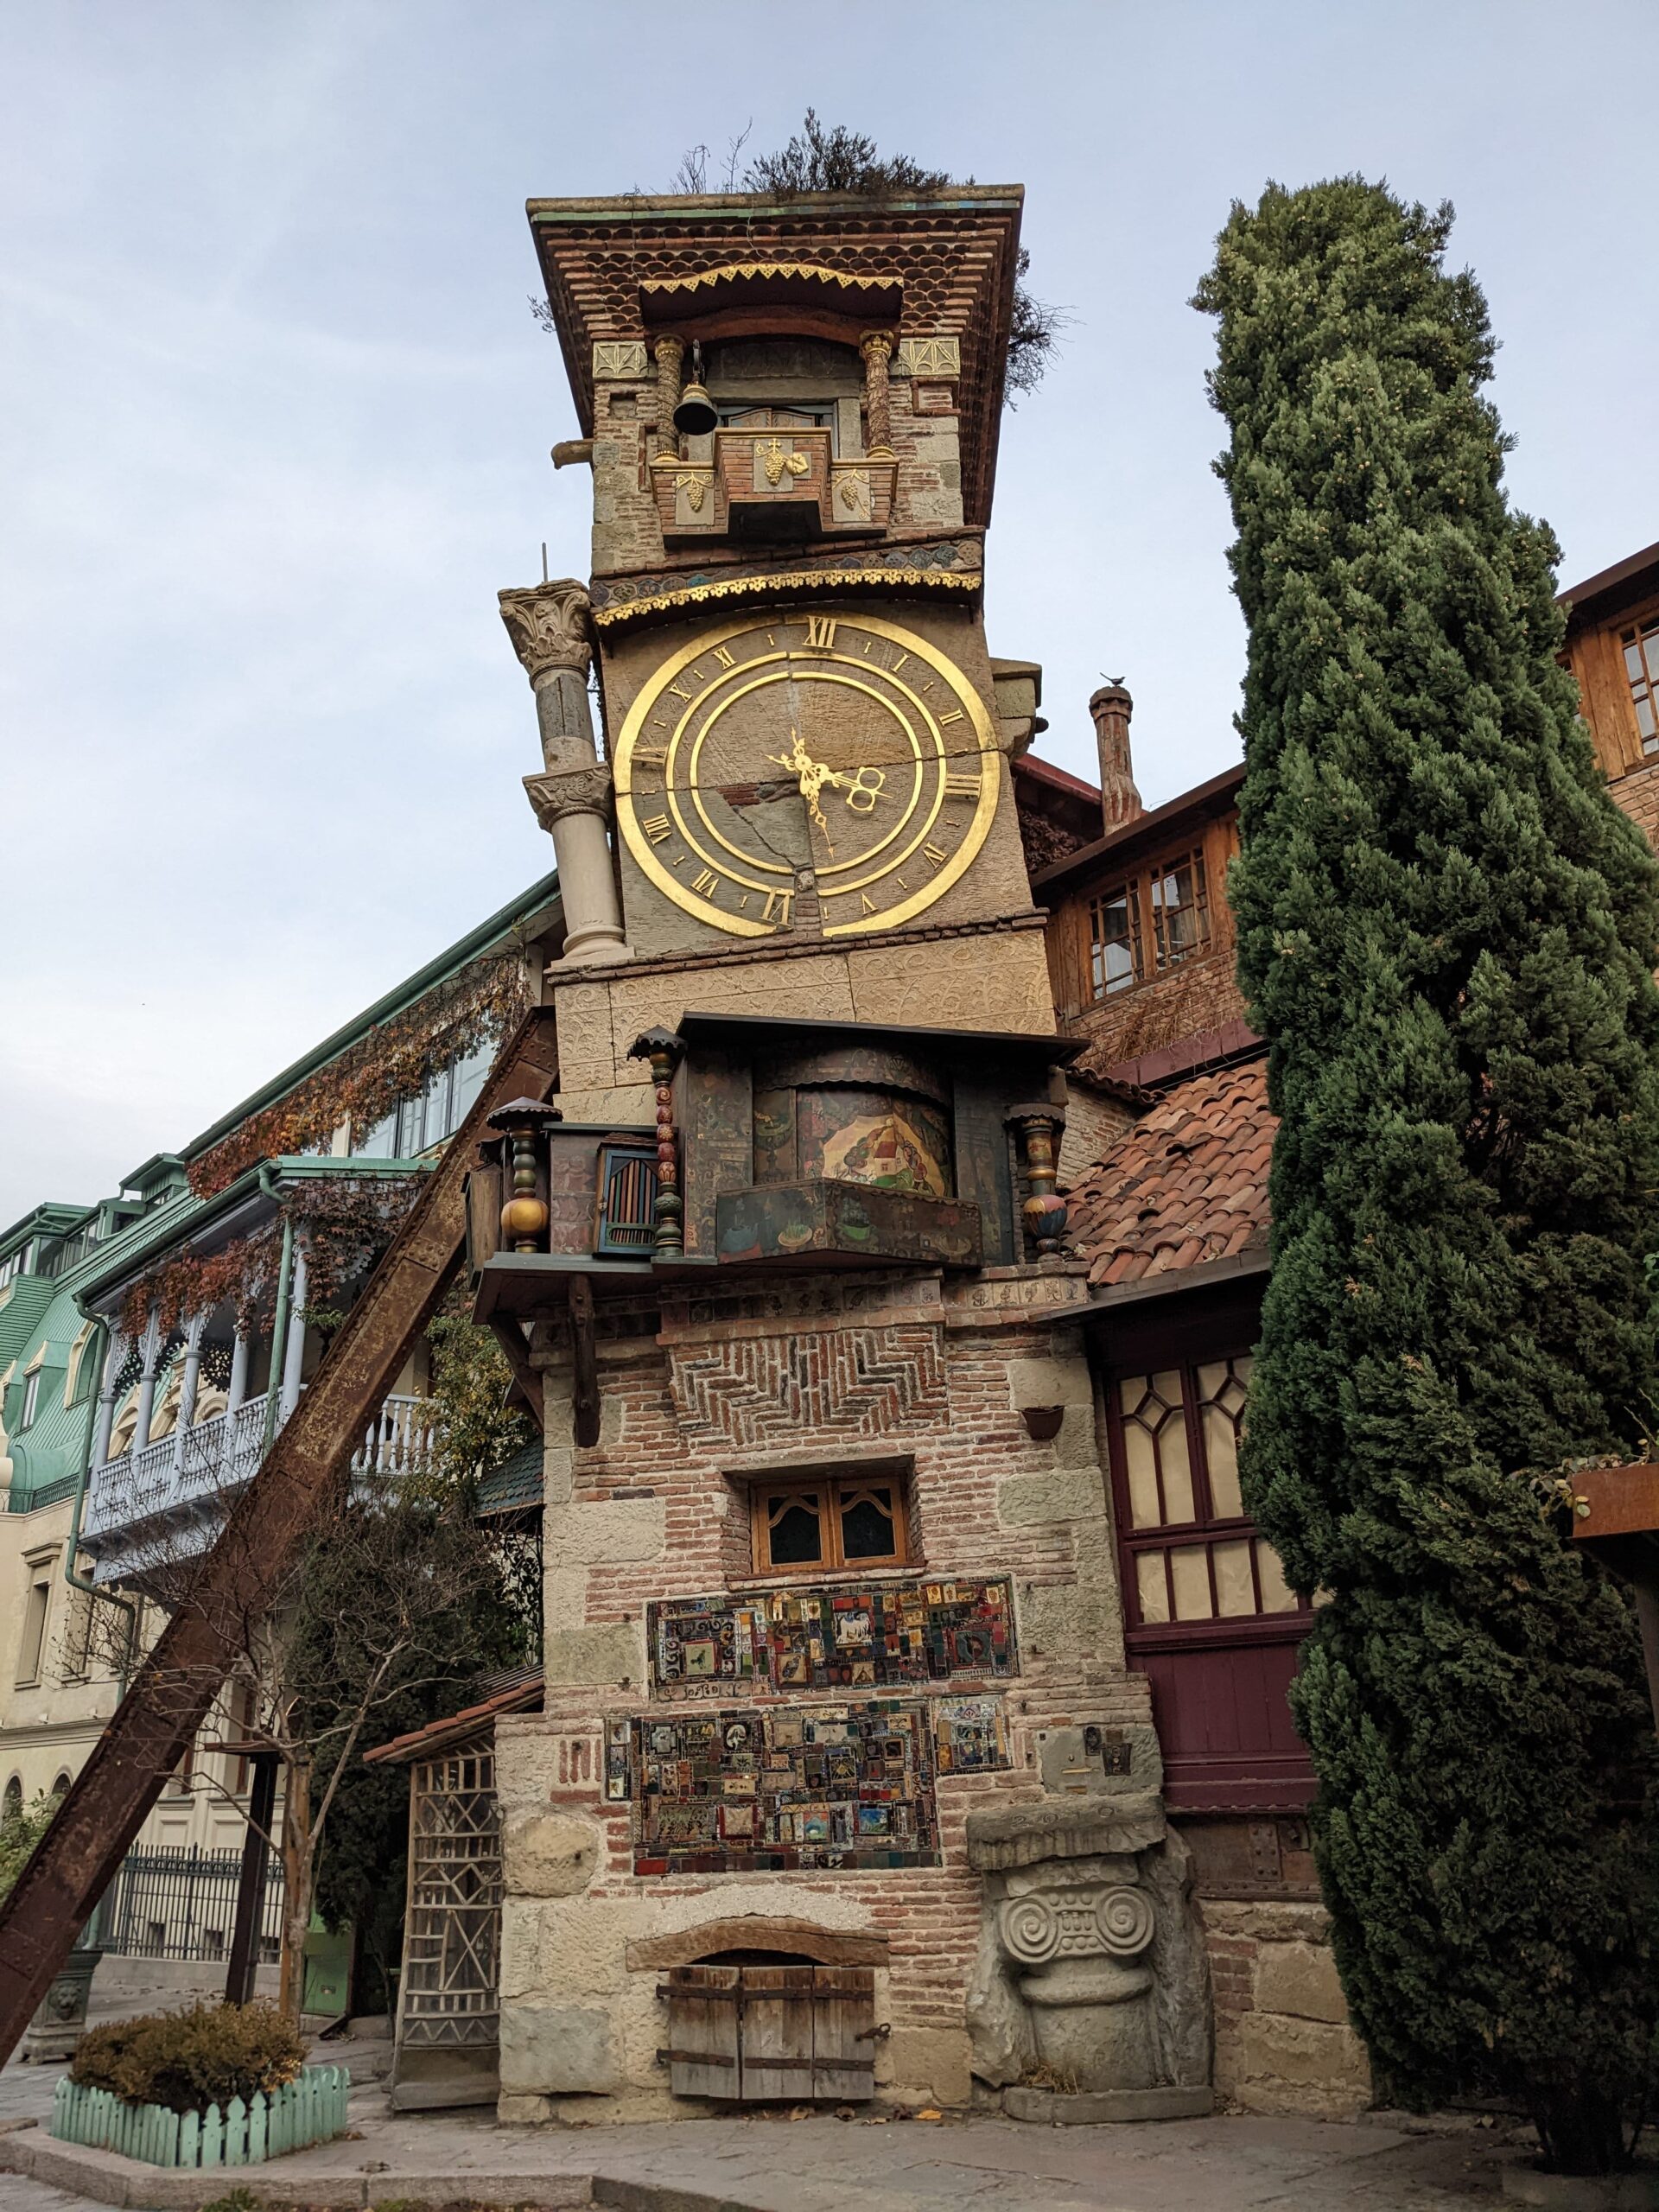 tbilisi wonky clock tower